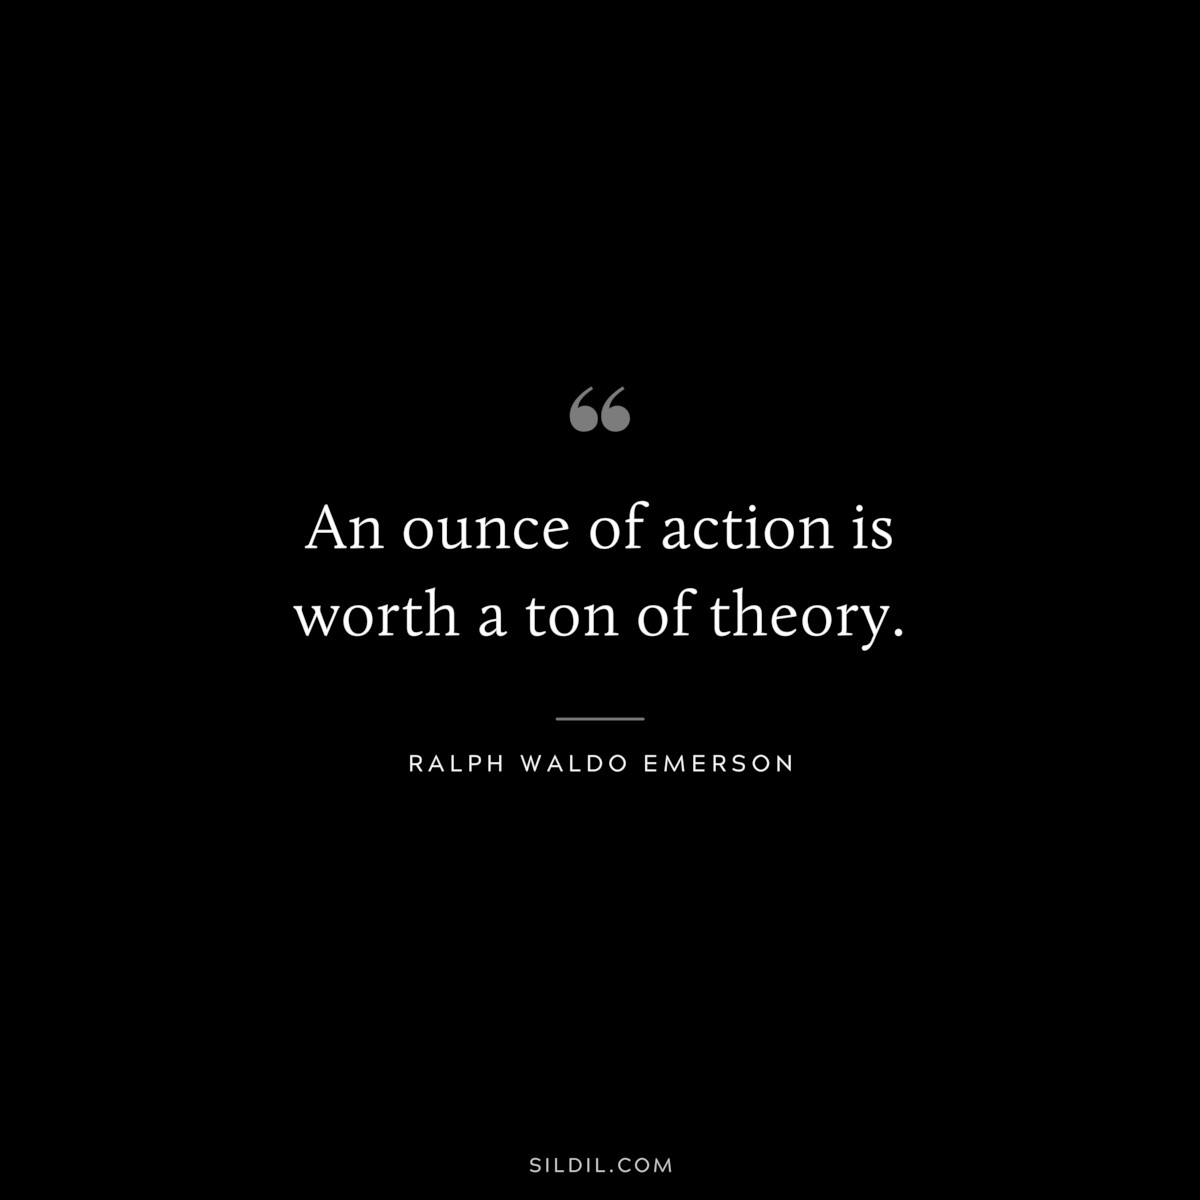 An ounce of action is worth a ton of theory. ― Ralph Waldo Emerson